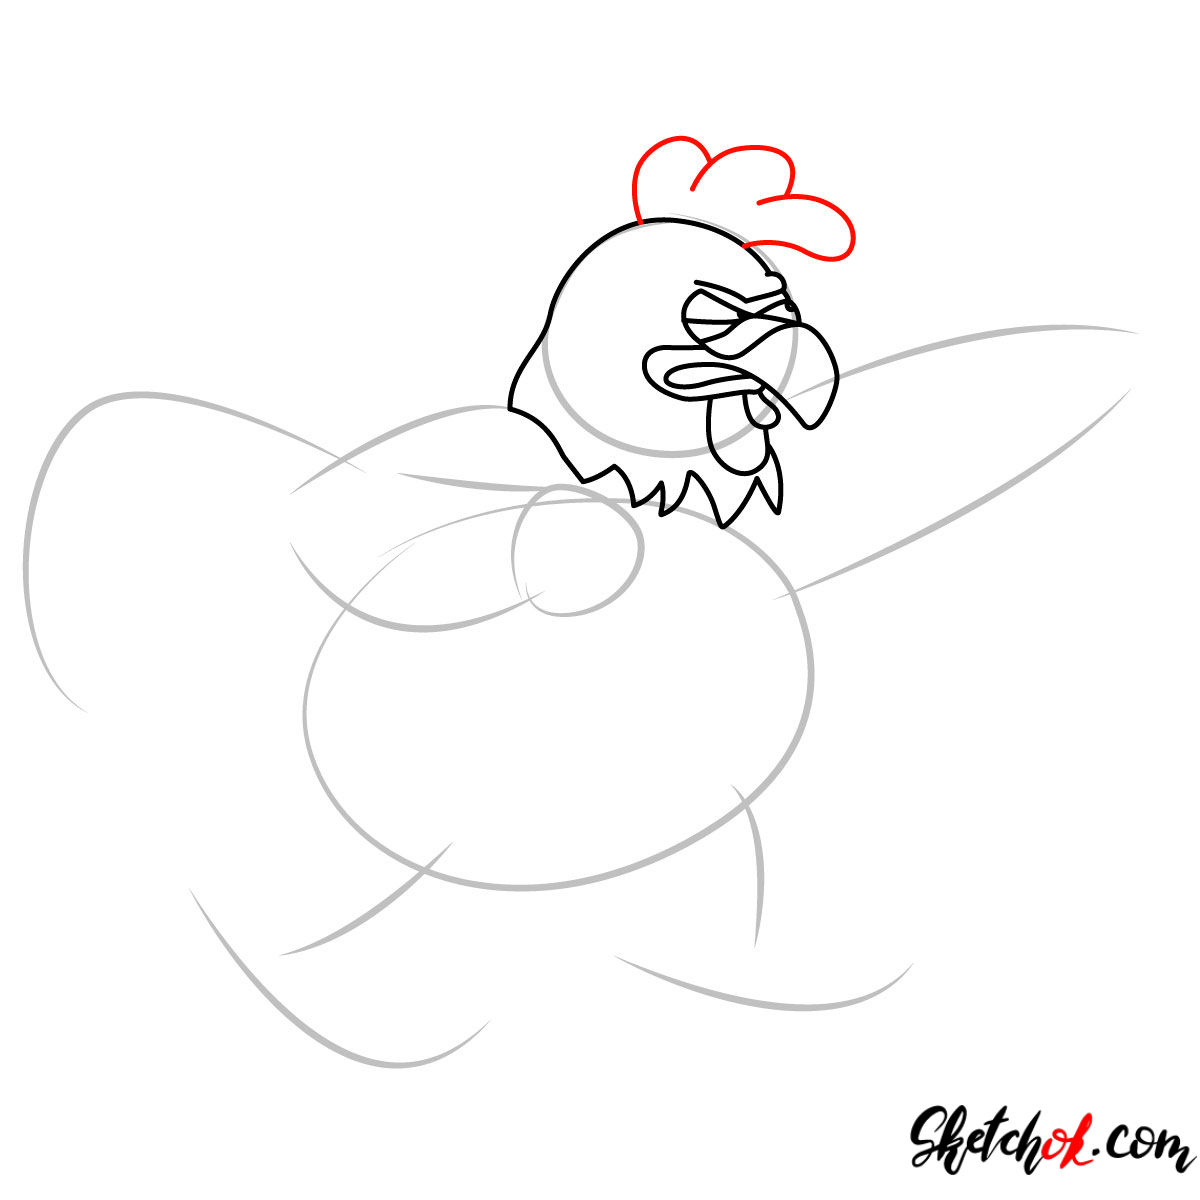 How to draw Ernie the Giant Chicken - step 04